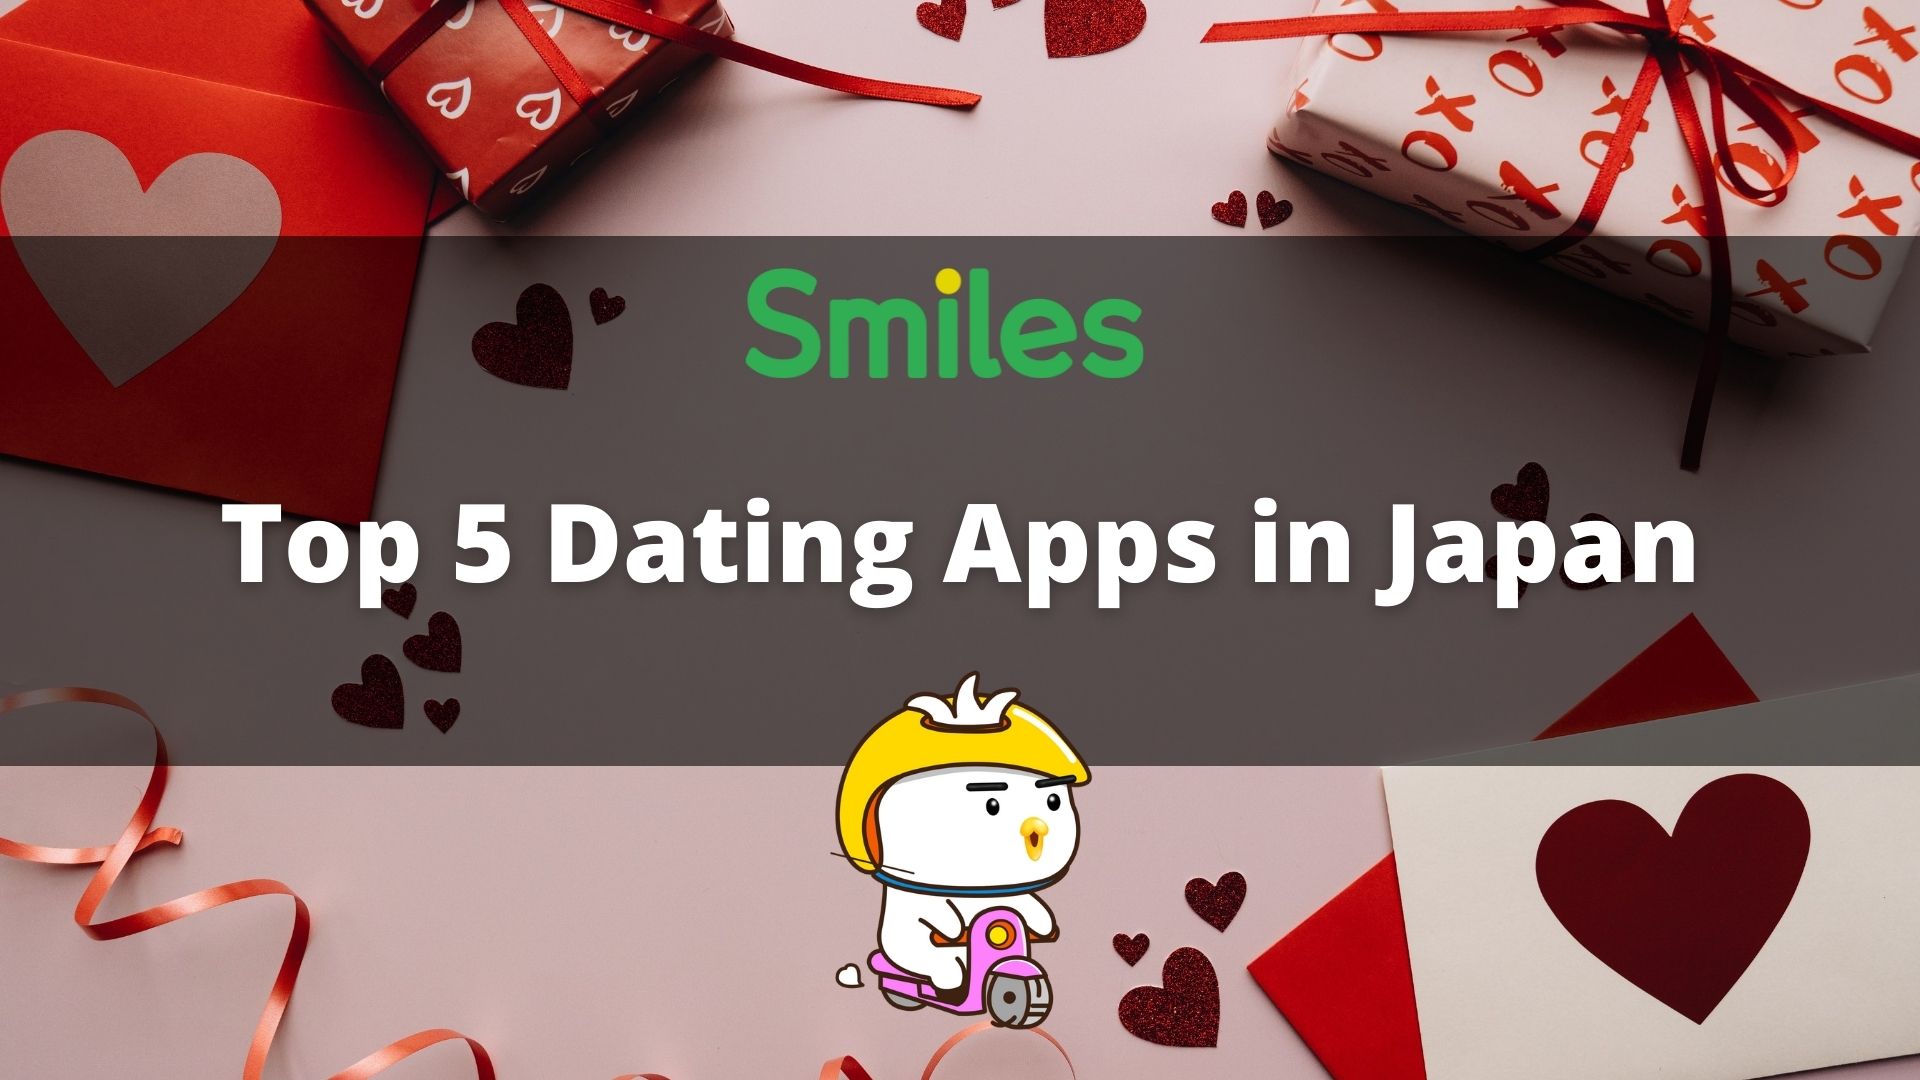 Top 5 Dating Apps in Japan